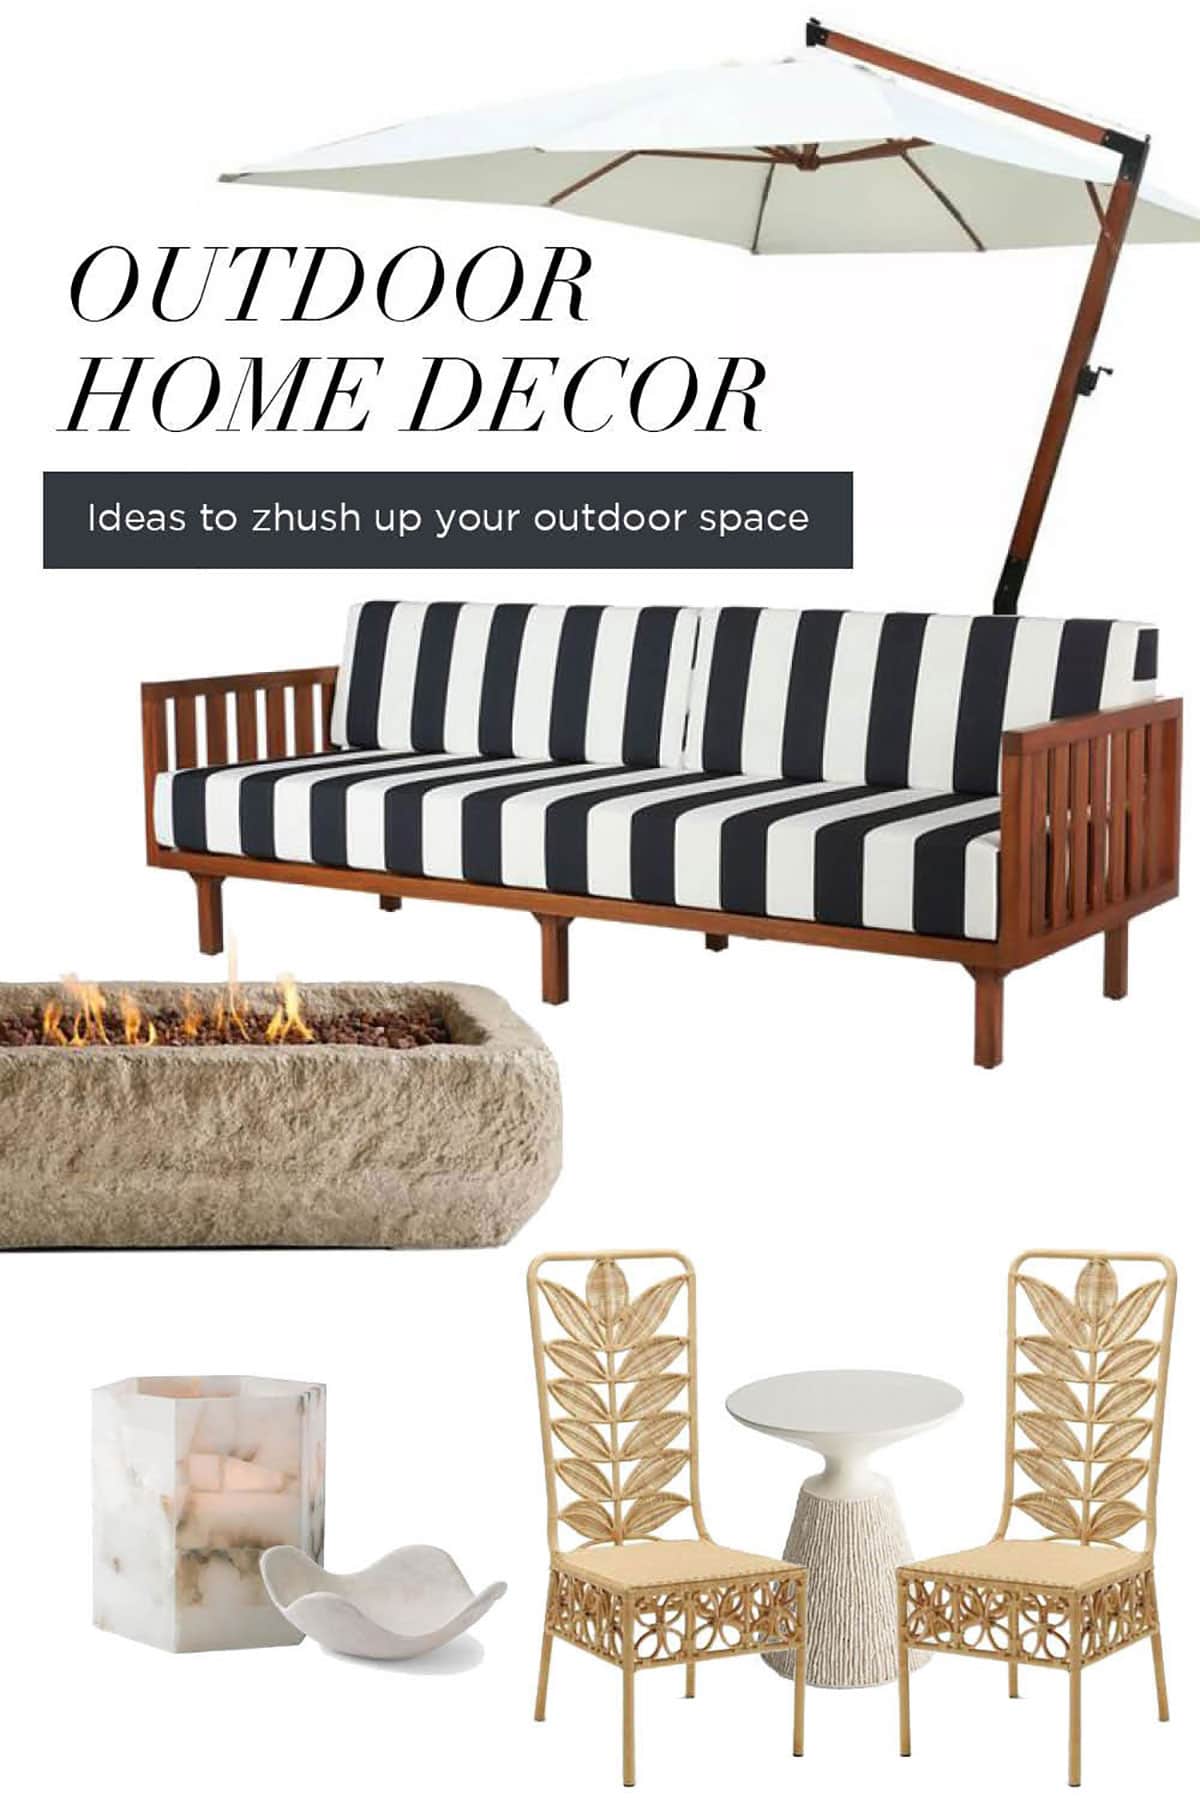 Patio and Outdoor Garden Decor — What's Trending - Shop my favorite trending home decor for your patio and outdoor garden.